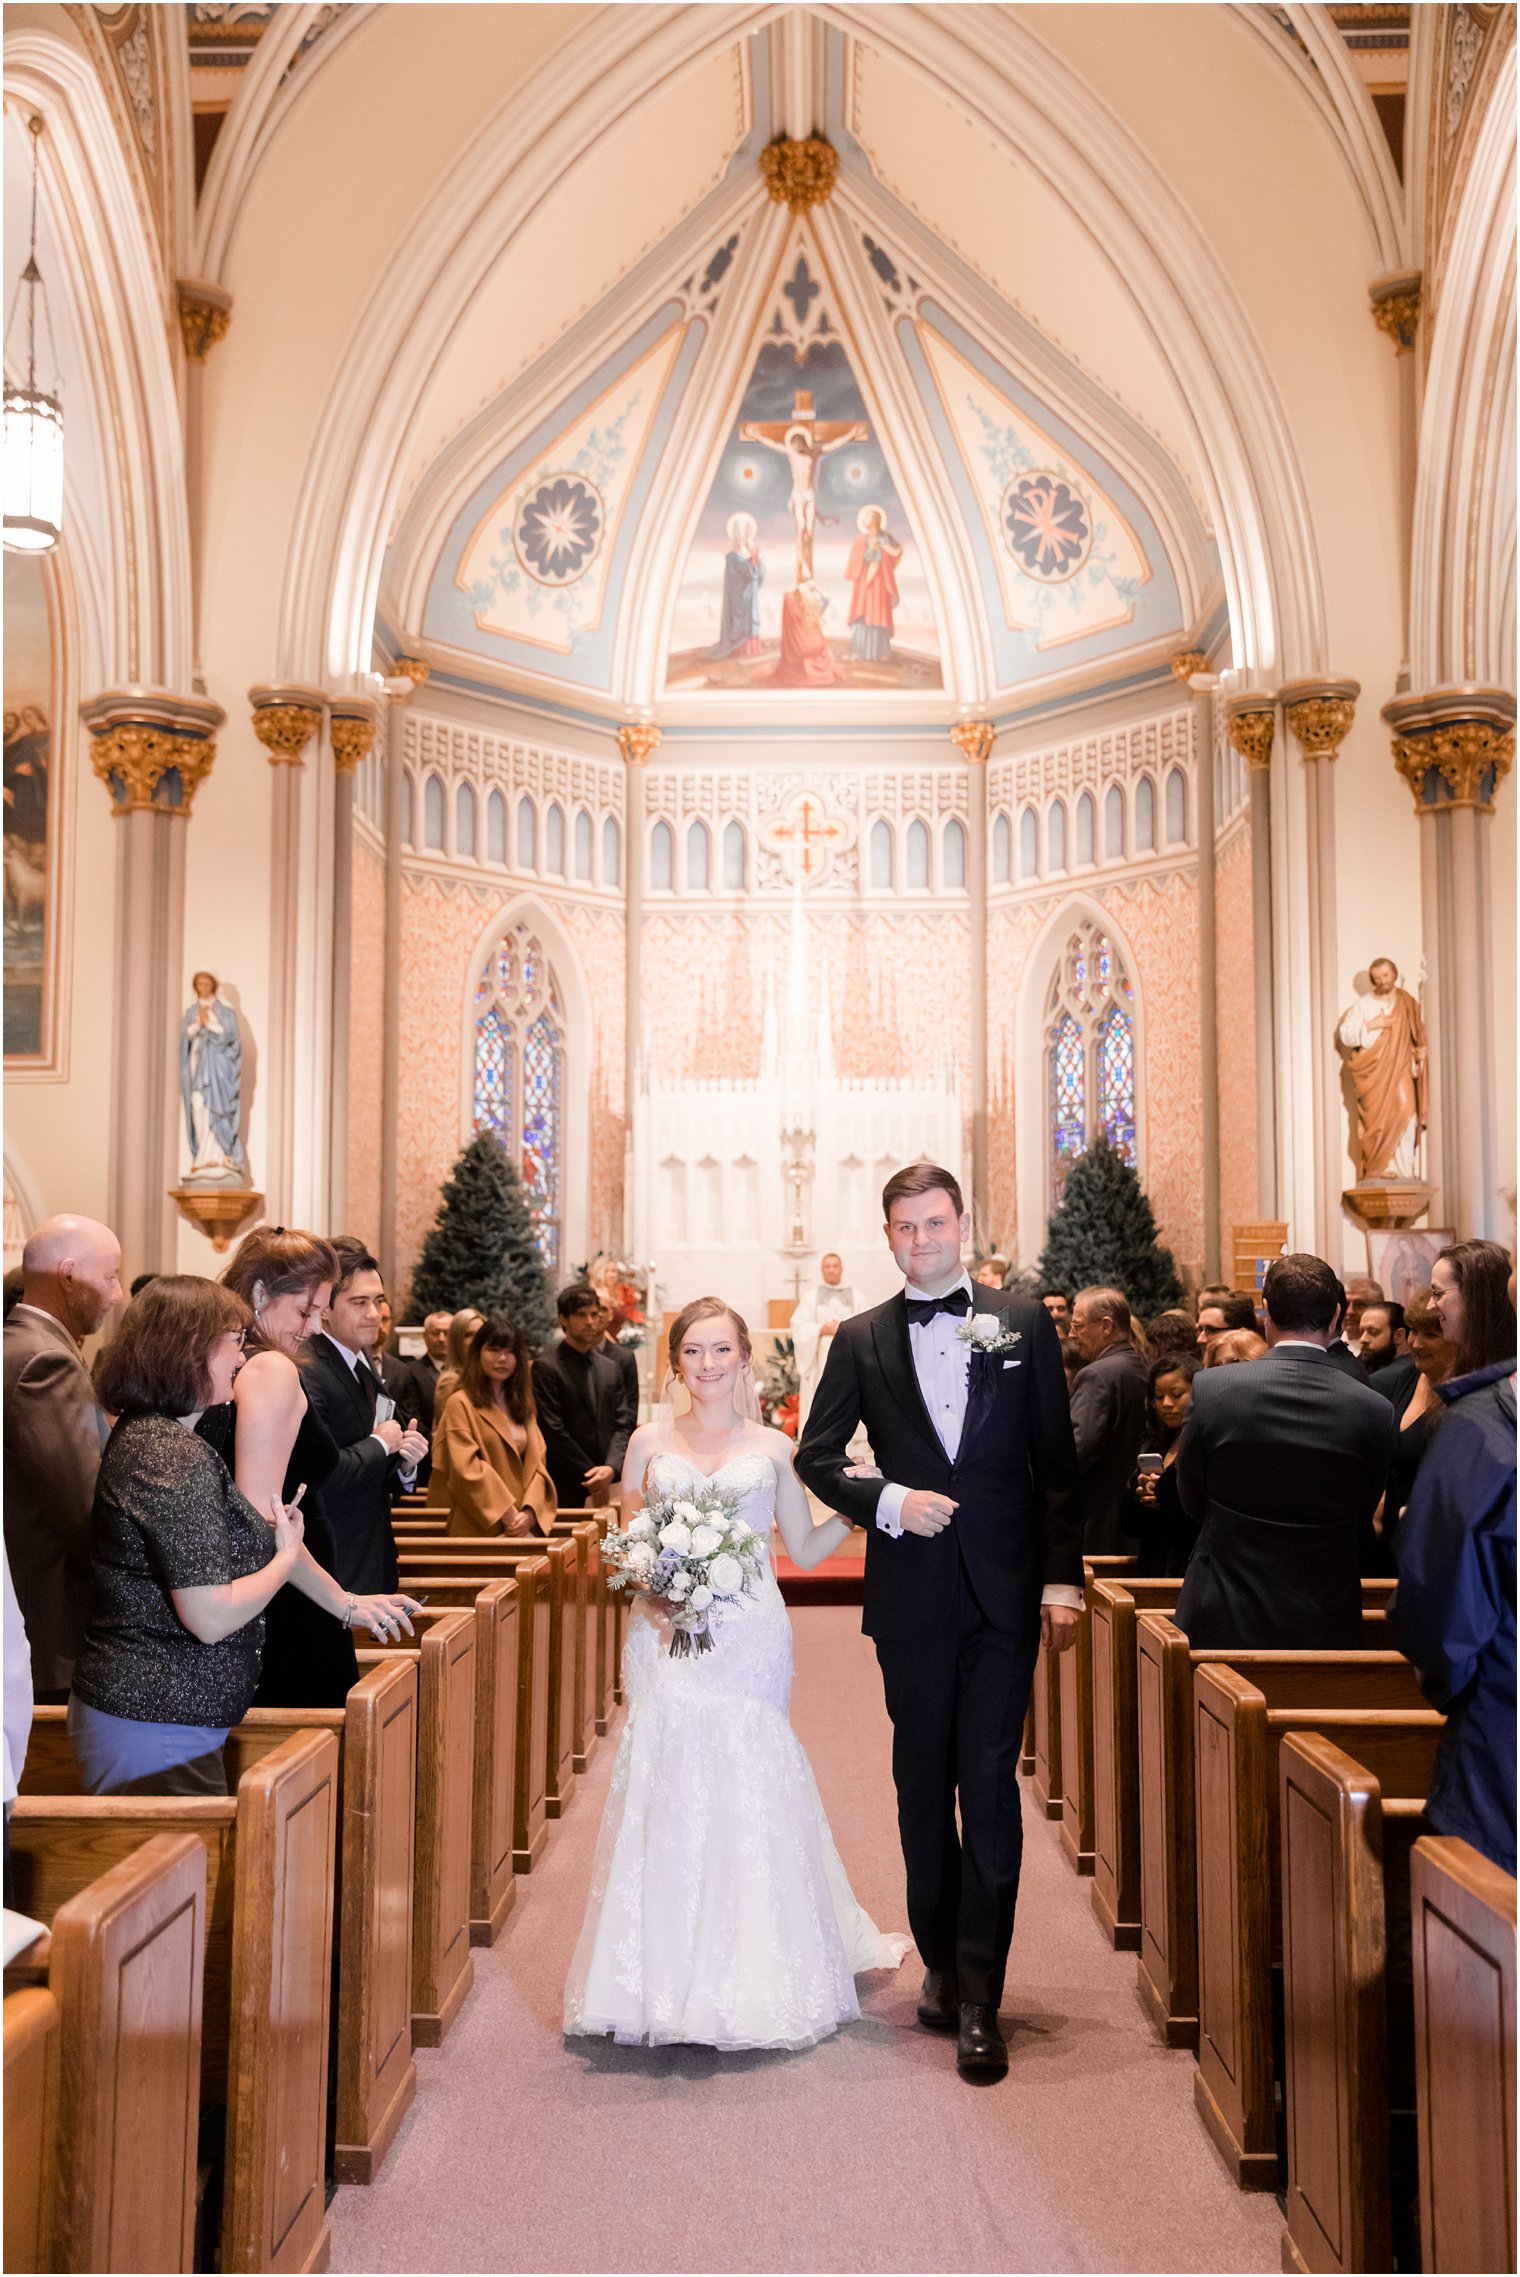 Bride and groom walking down the aisle at St. Peter the Apostle